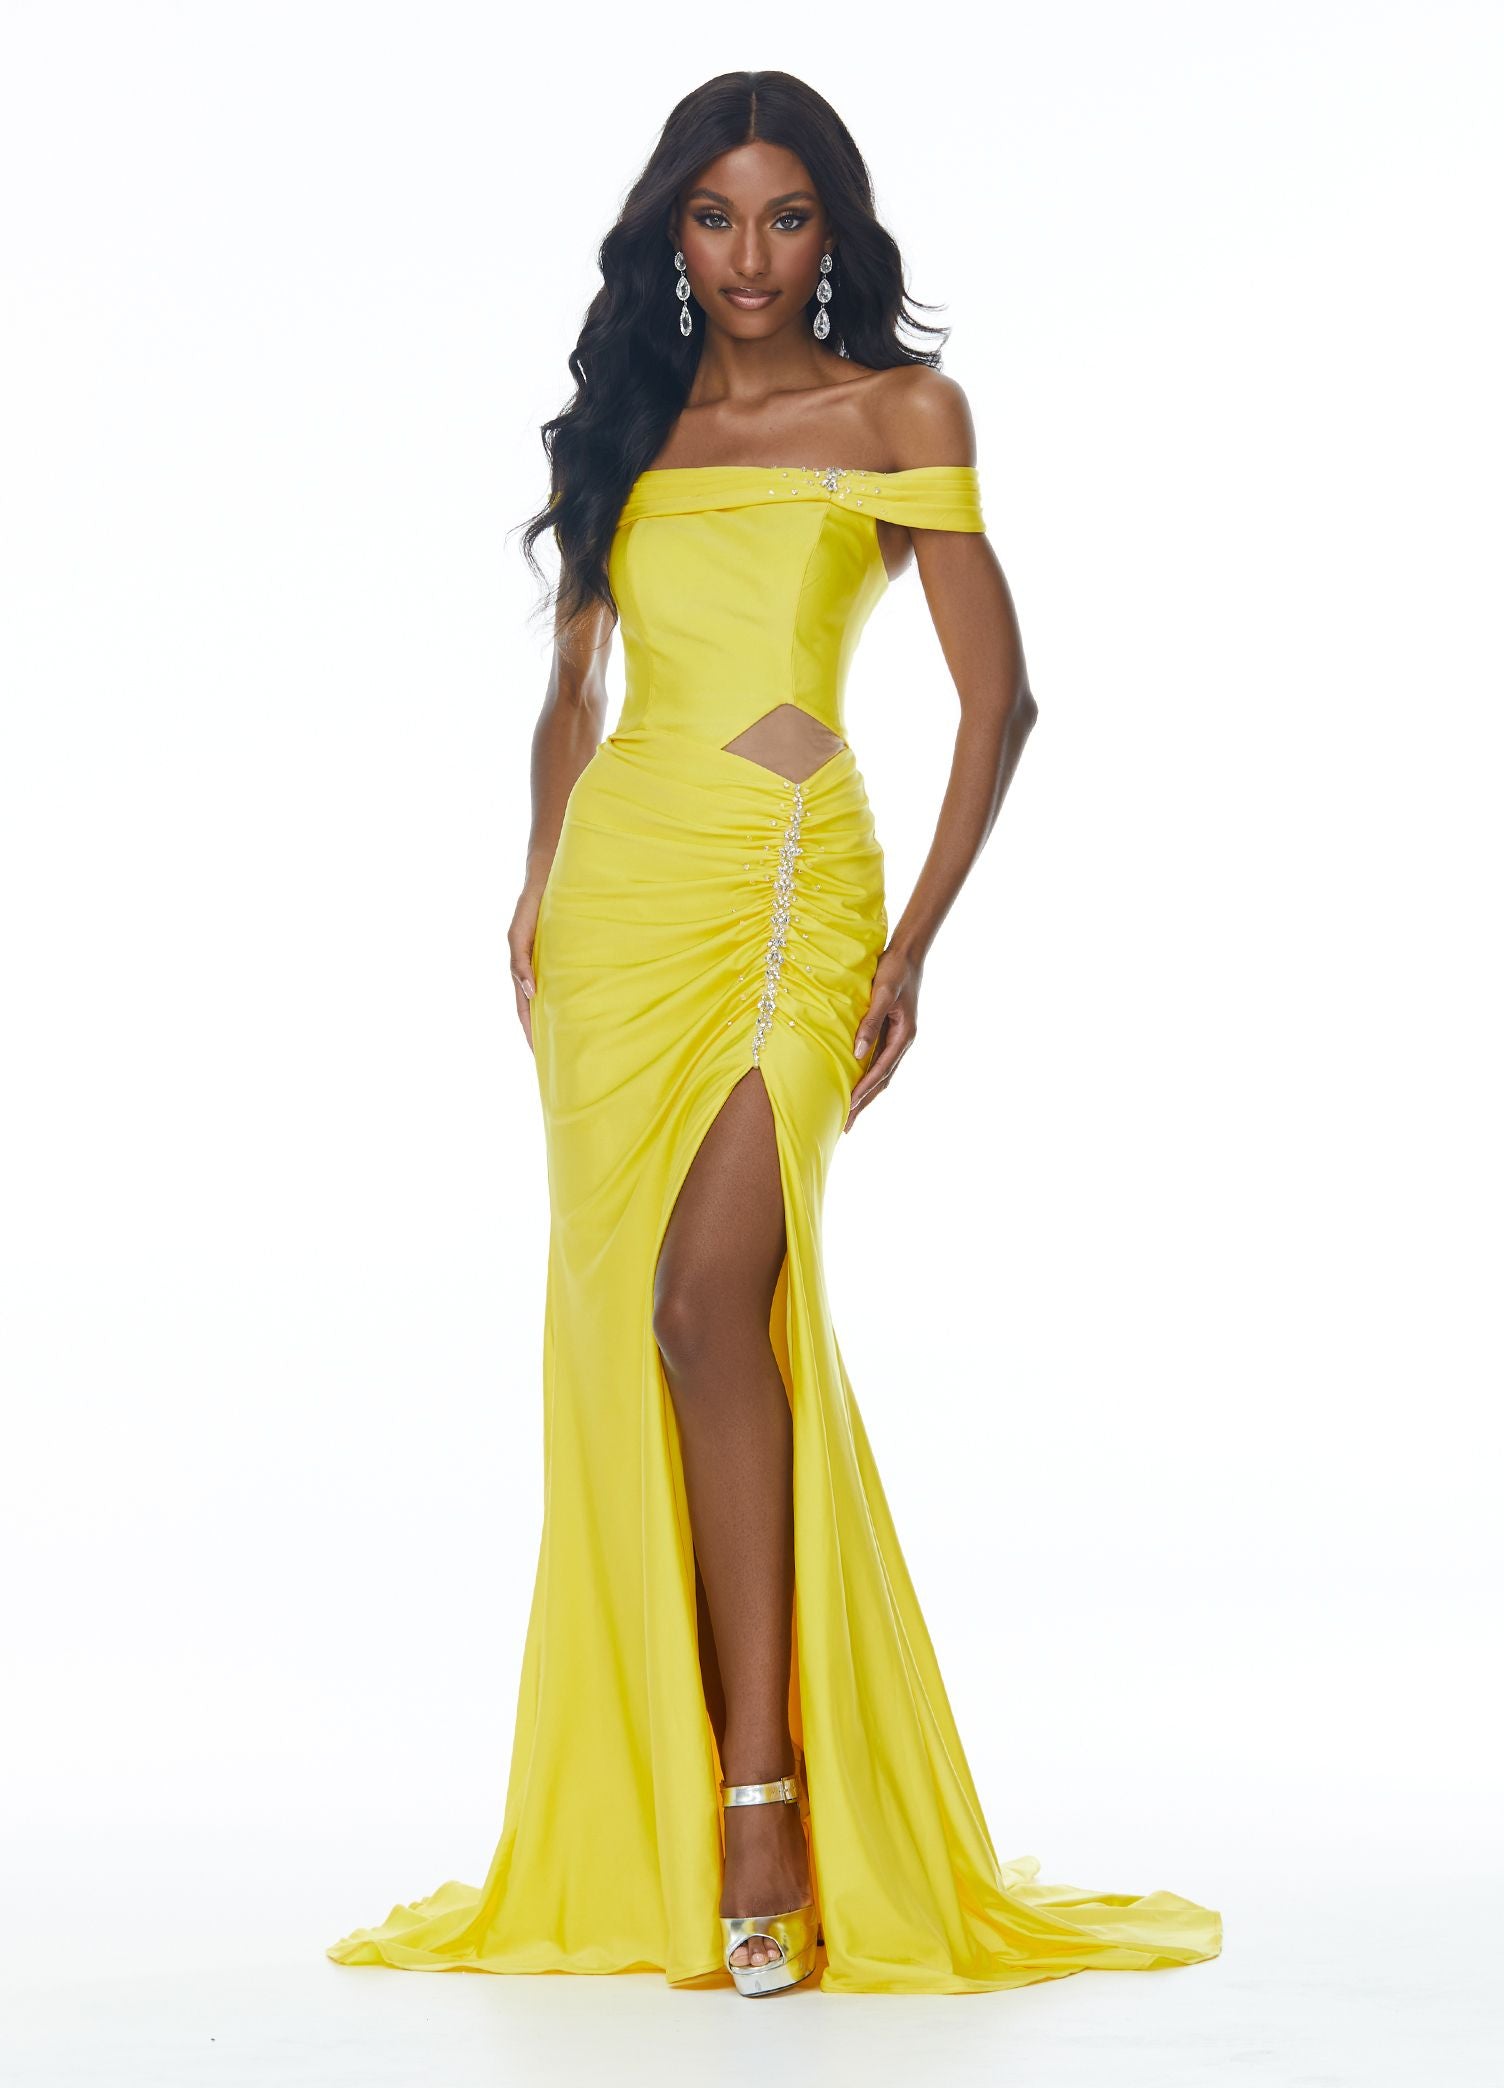 Ashley Lauren 11031 This jersey prom dress has a ruching along the off shoulder straps and waistline, crystal detailing, a modern cut out and lace up back. The skirt on this long pageant evening gown is complete with a left leg slit.  Colors  Yellow, Royal  Sizes  0, 2, 4, 6, 8, 10, 12, 14, 16  Off Shoulder Cut Out Slit Lace up Back